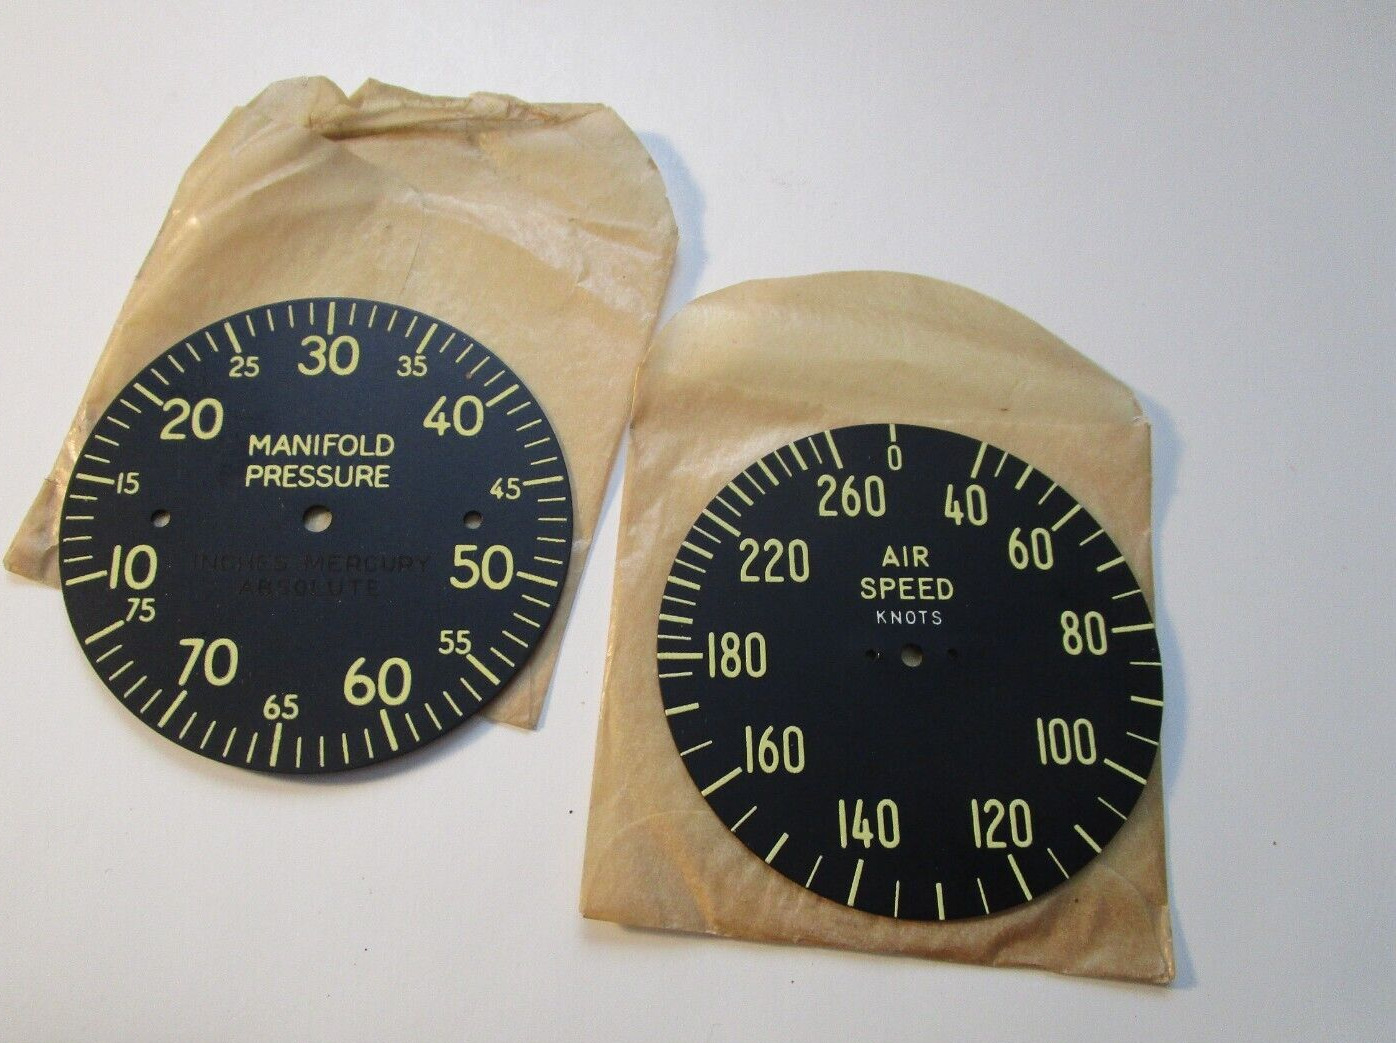 WW2 ARMY AIR FORCE AIRCRAFT MANIFOLD & AIR SPEED INDICATOR PLATES